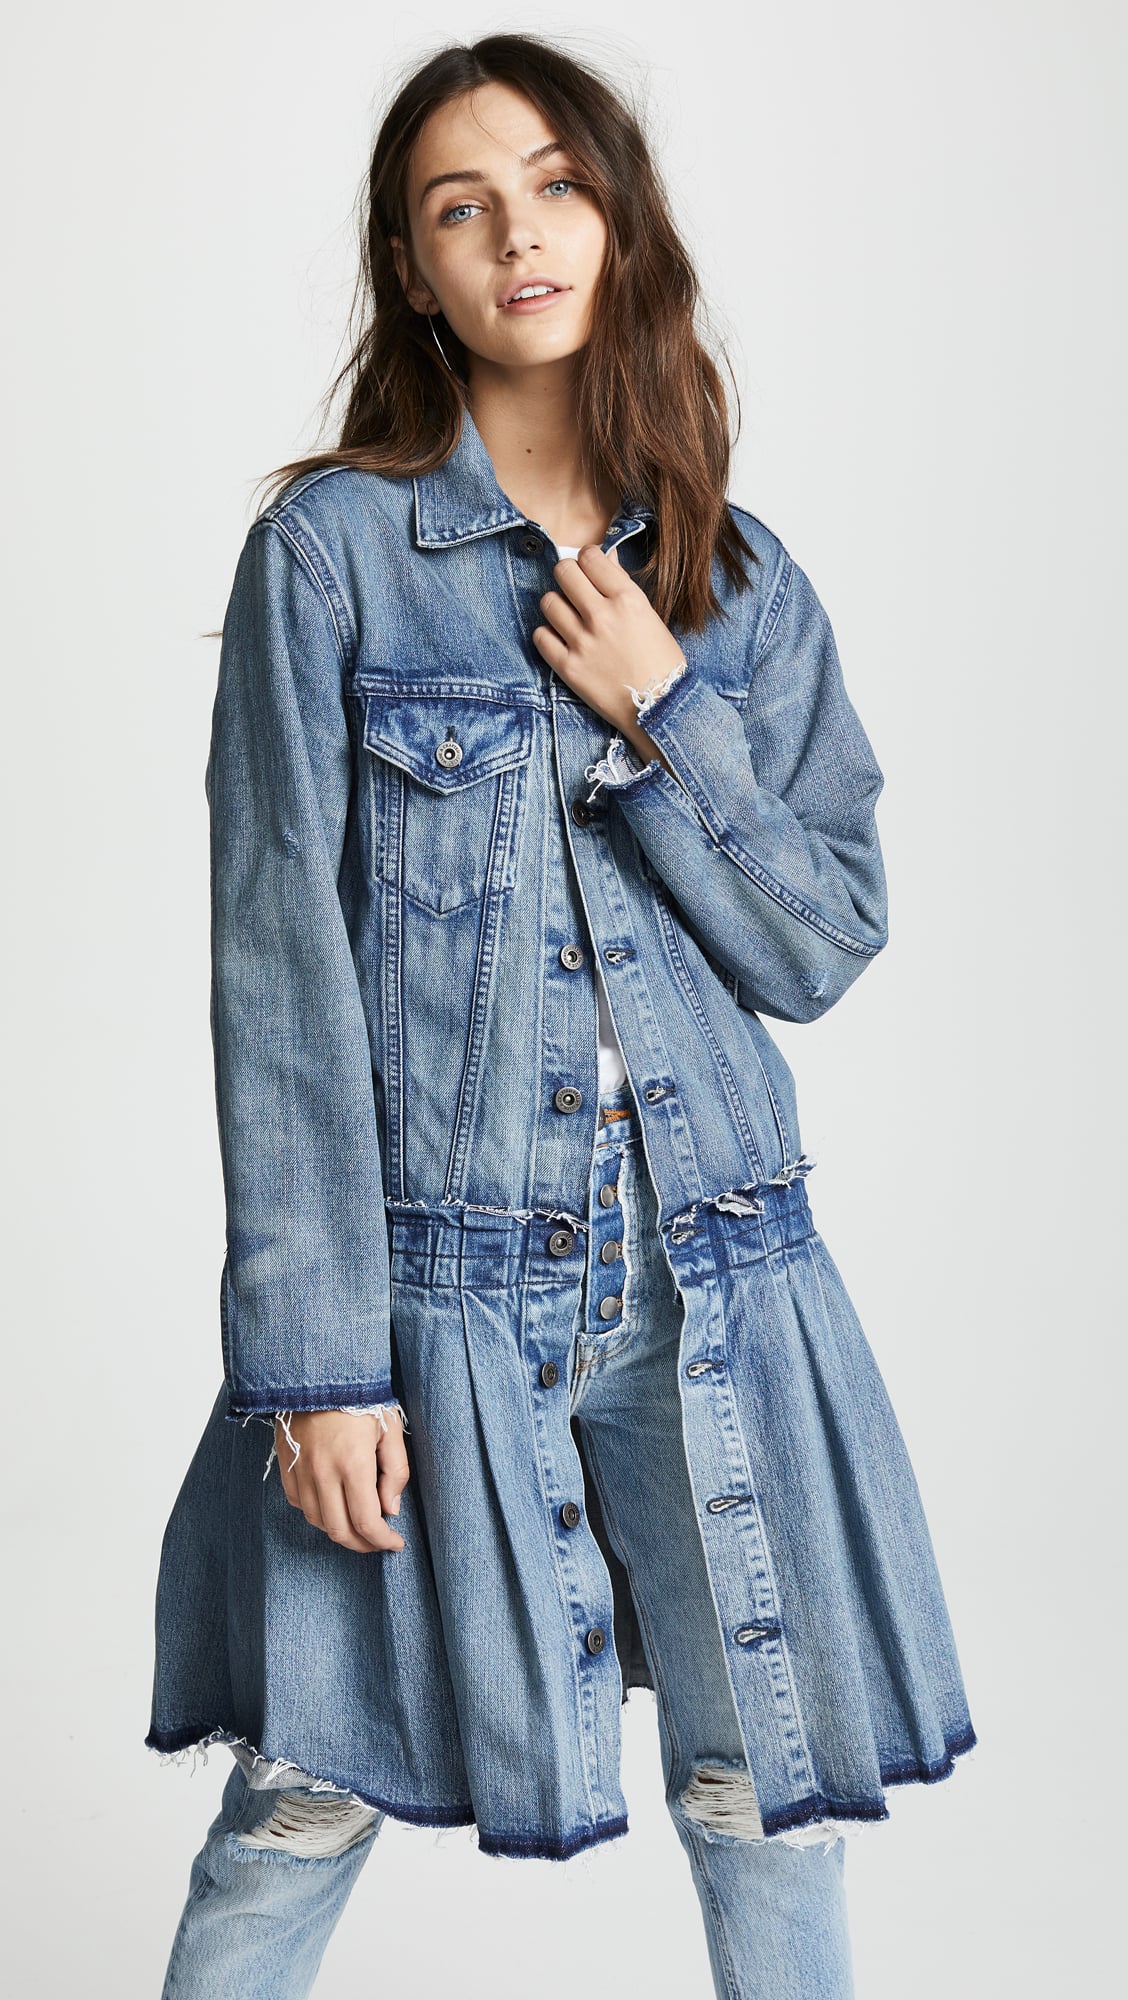 Levi's LMC Pleated Trucker Jacket | 6 Jacket Trends You'll Be Lusting After  This Fall | POPSUGAR Fashion Photo 16